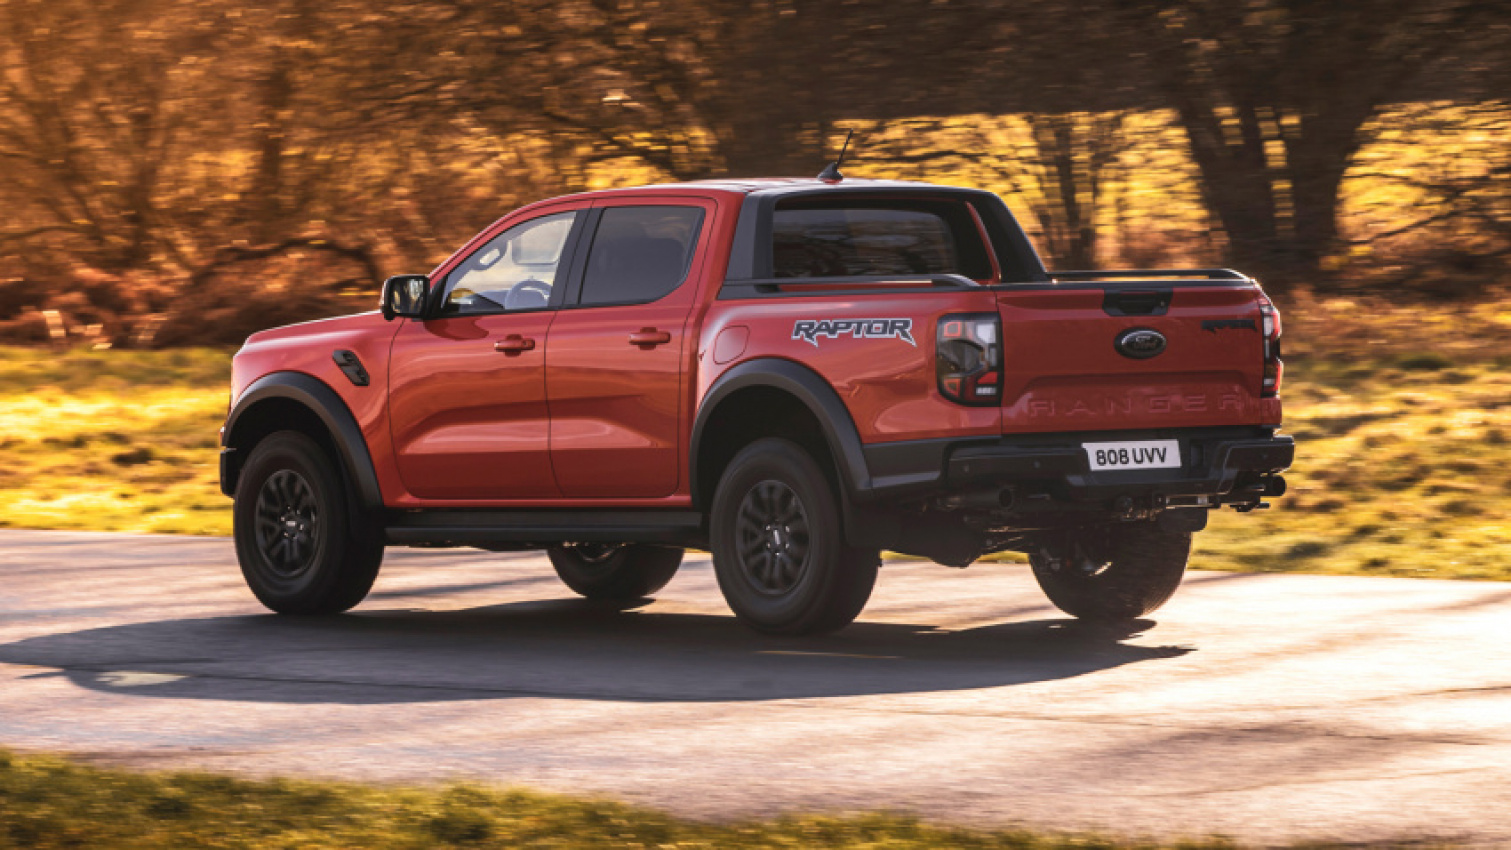 auto news, autos, cars, ford, ecoboost, ecoboost v6, ford ranger, ford ranger raptor, ranger raptor, twin turbo v6, twin-turbo, 2023 ford ranger raptor unleashed with 3.0l ecoboost v6